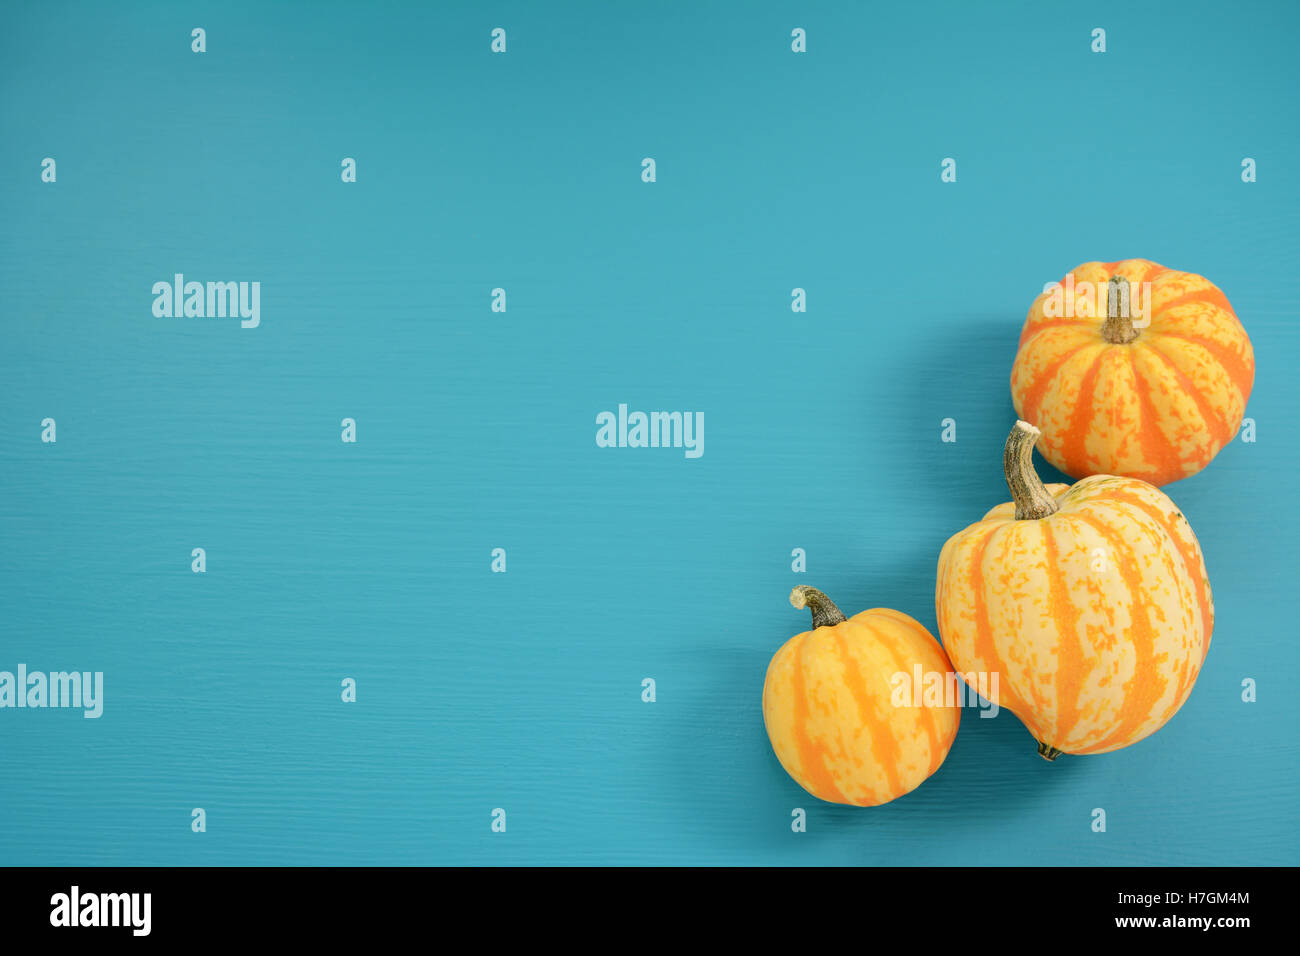 Three yellow and orange Festival squash arranged on blue painted wooden background with copy space Stock Photo